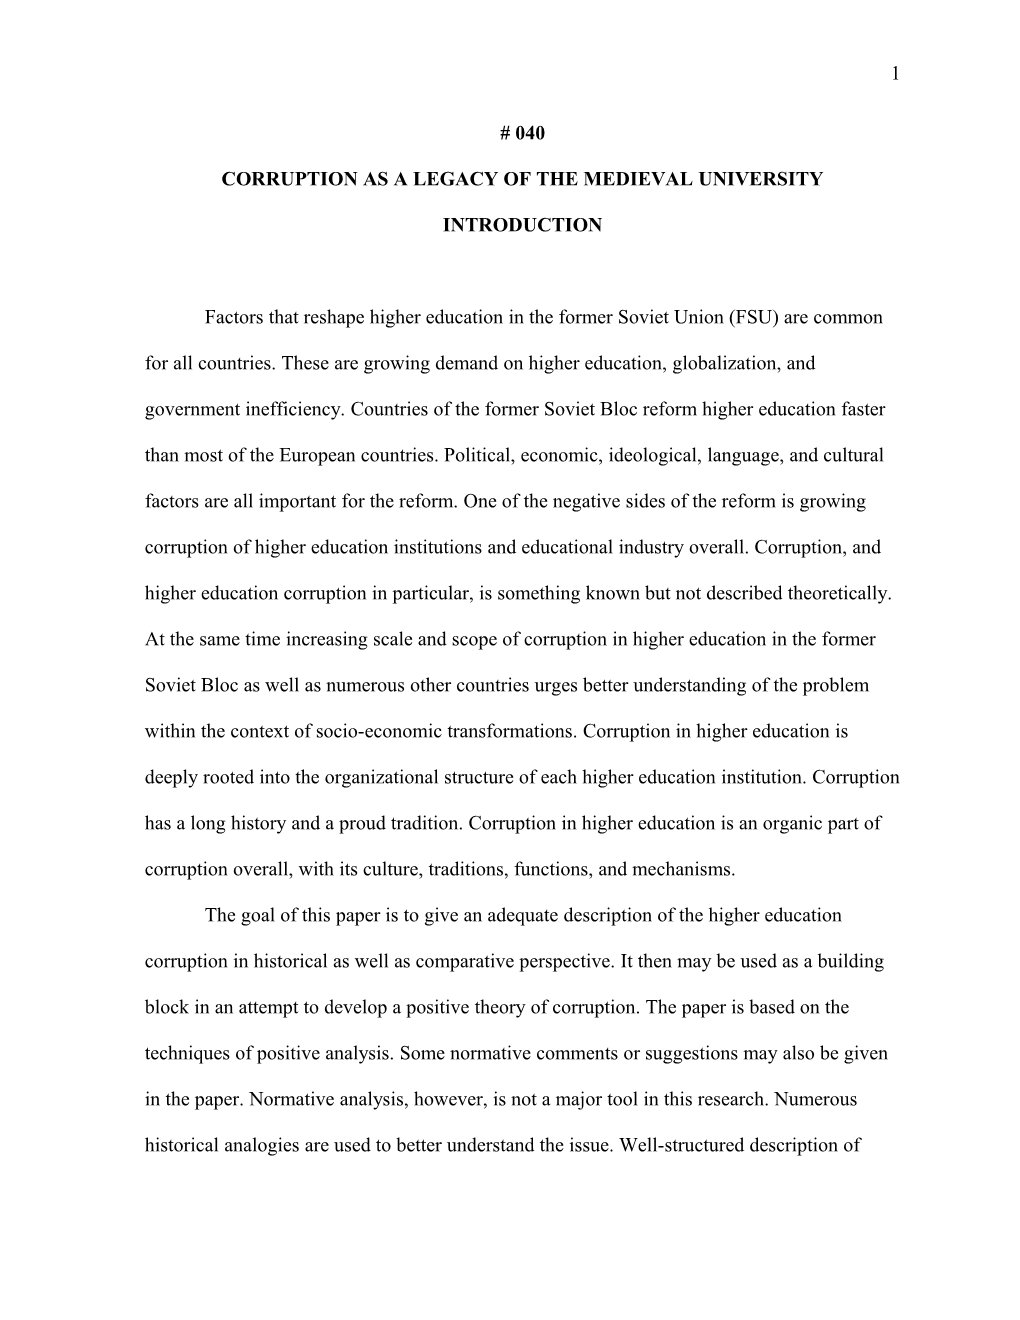 Corruption As a Legacy of the Medieval University